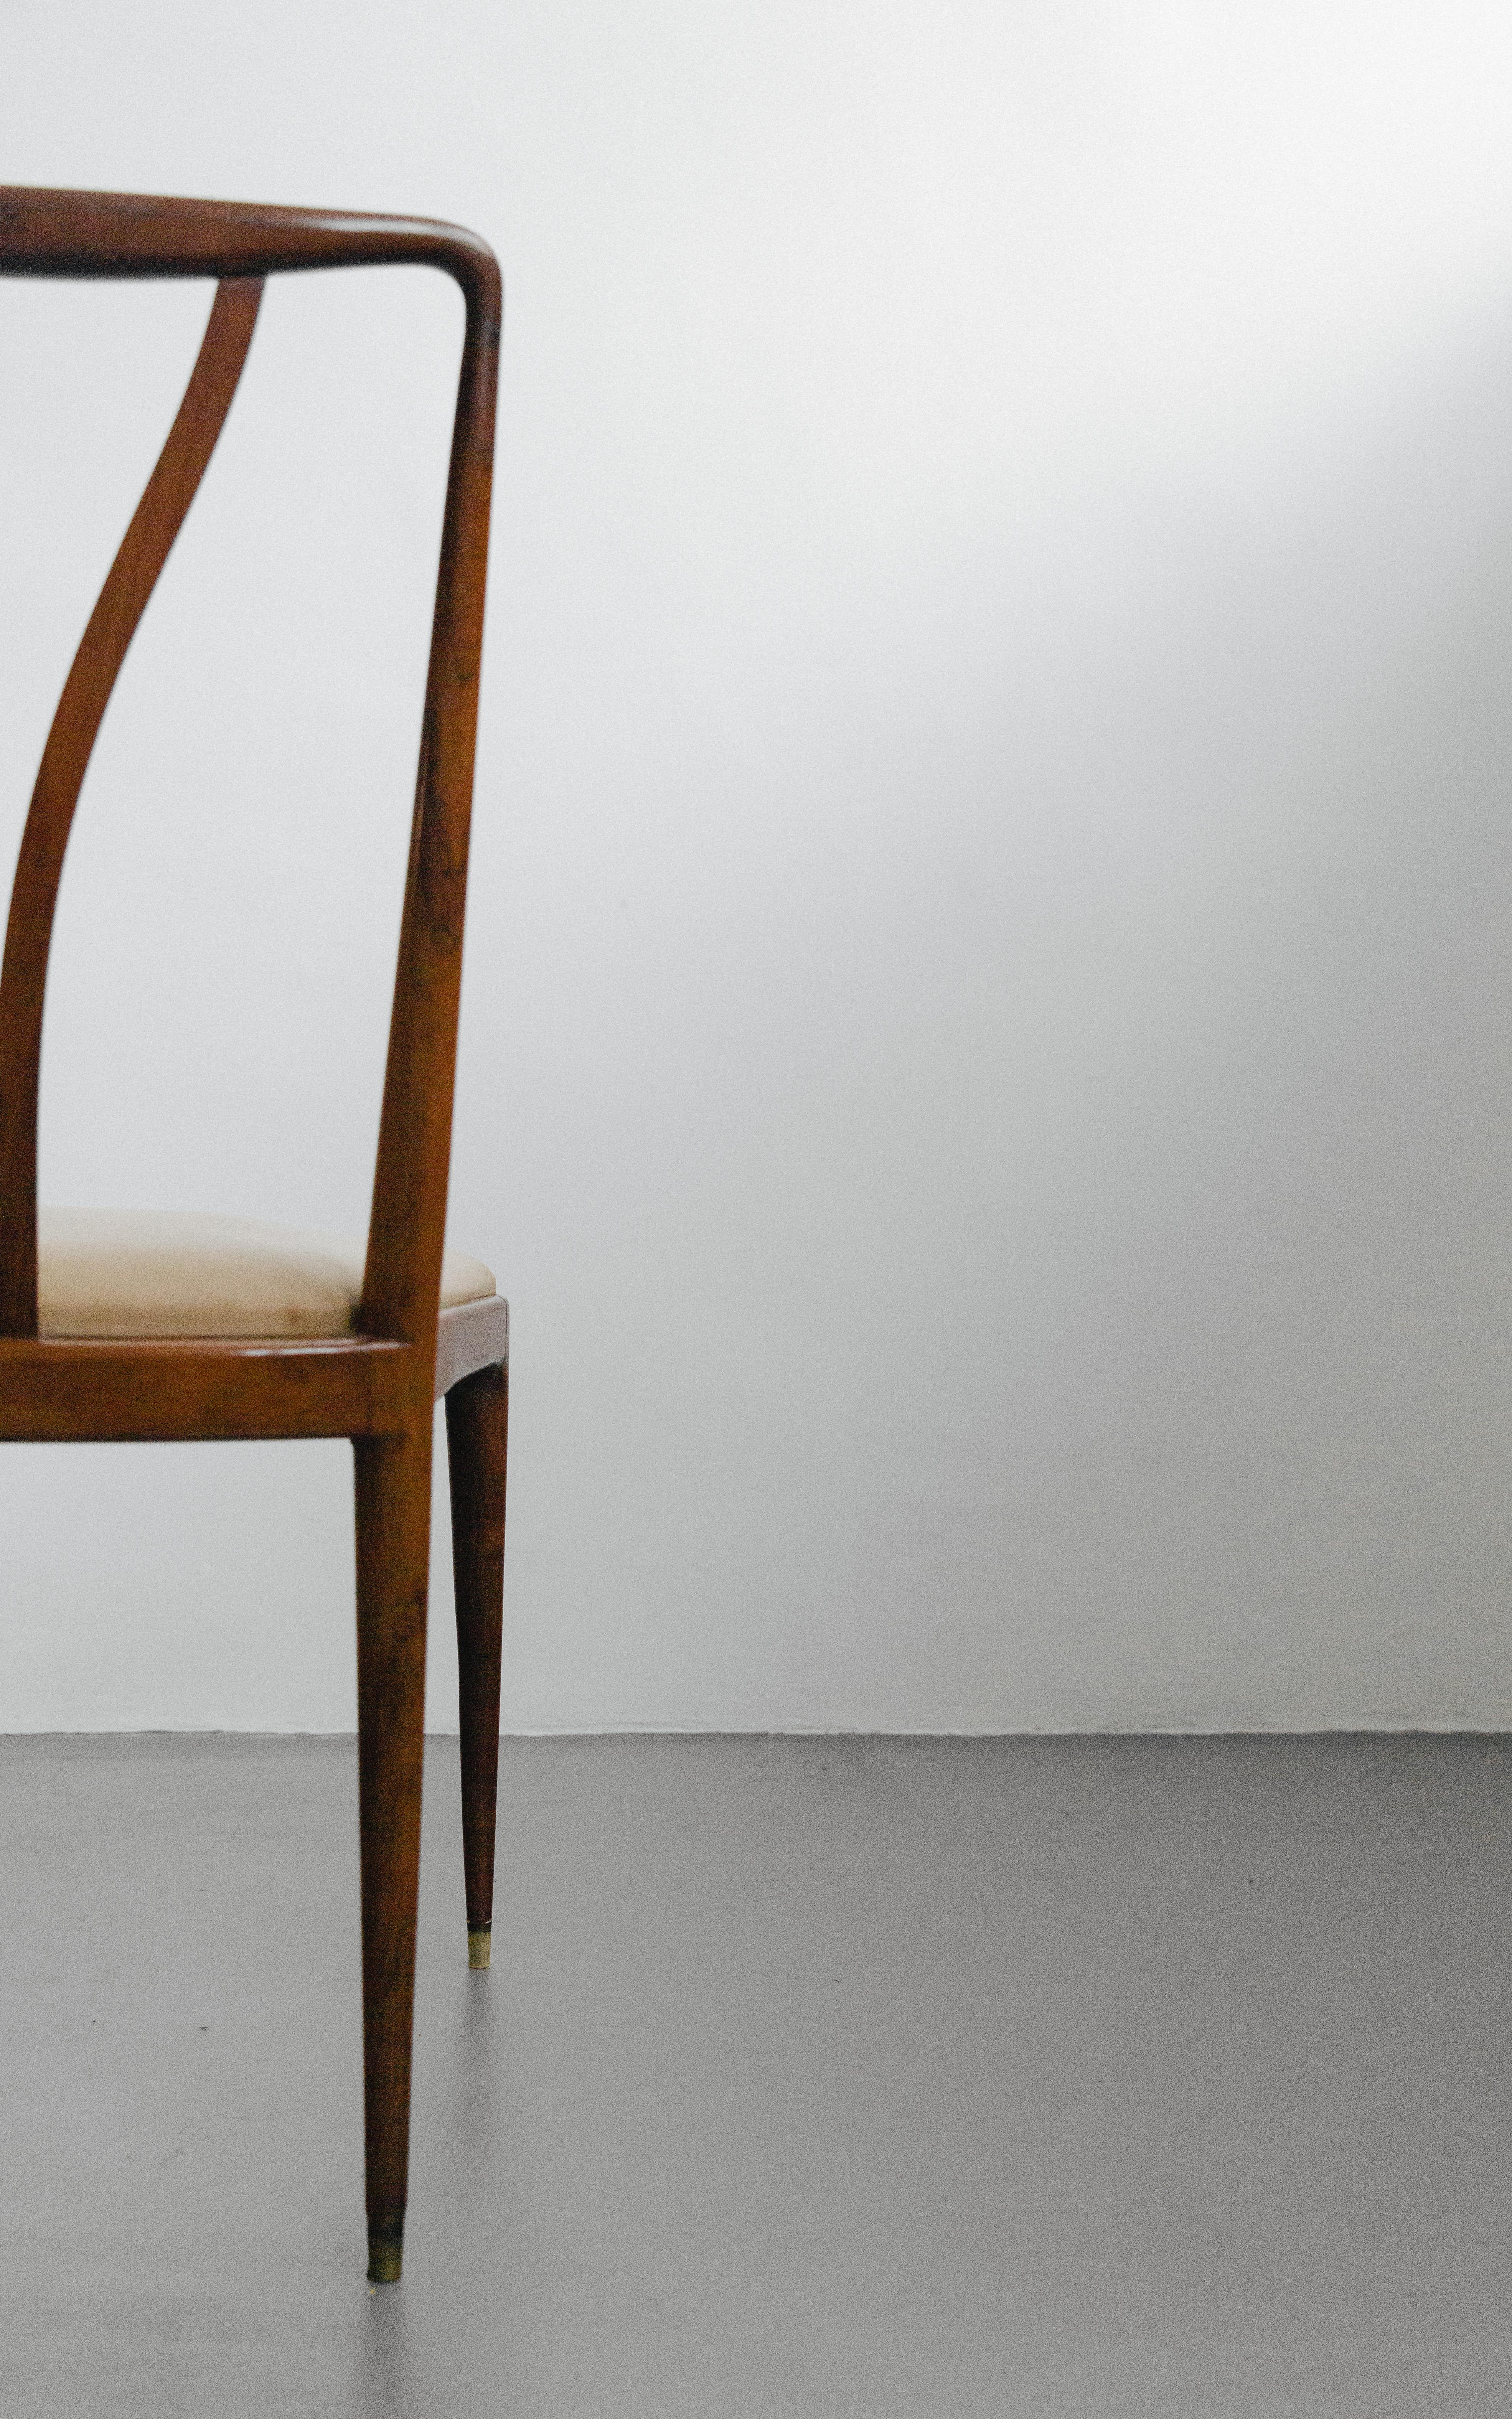 Rosewood Dining Chair, Giuseppe Scapinelli, Brazilian Midcentury, 1950s 1